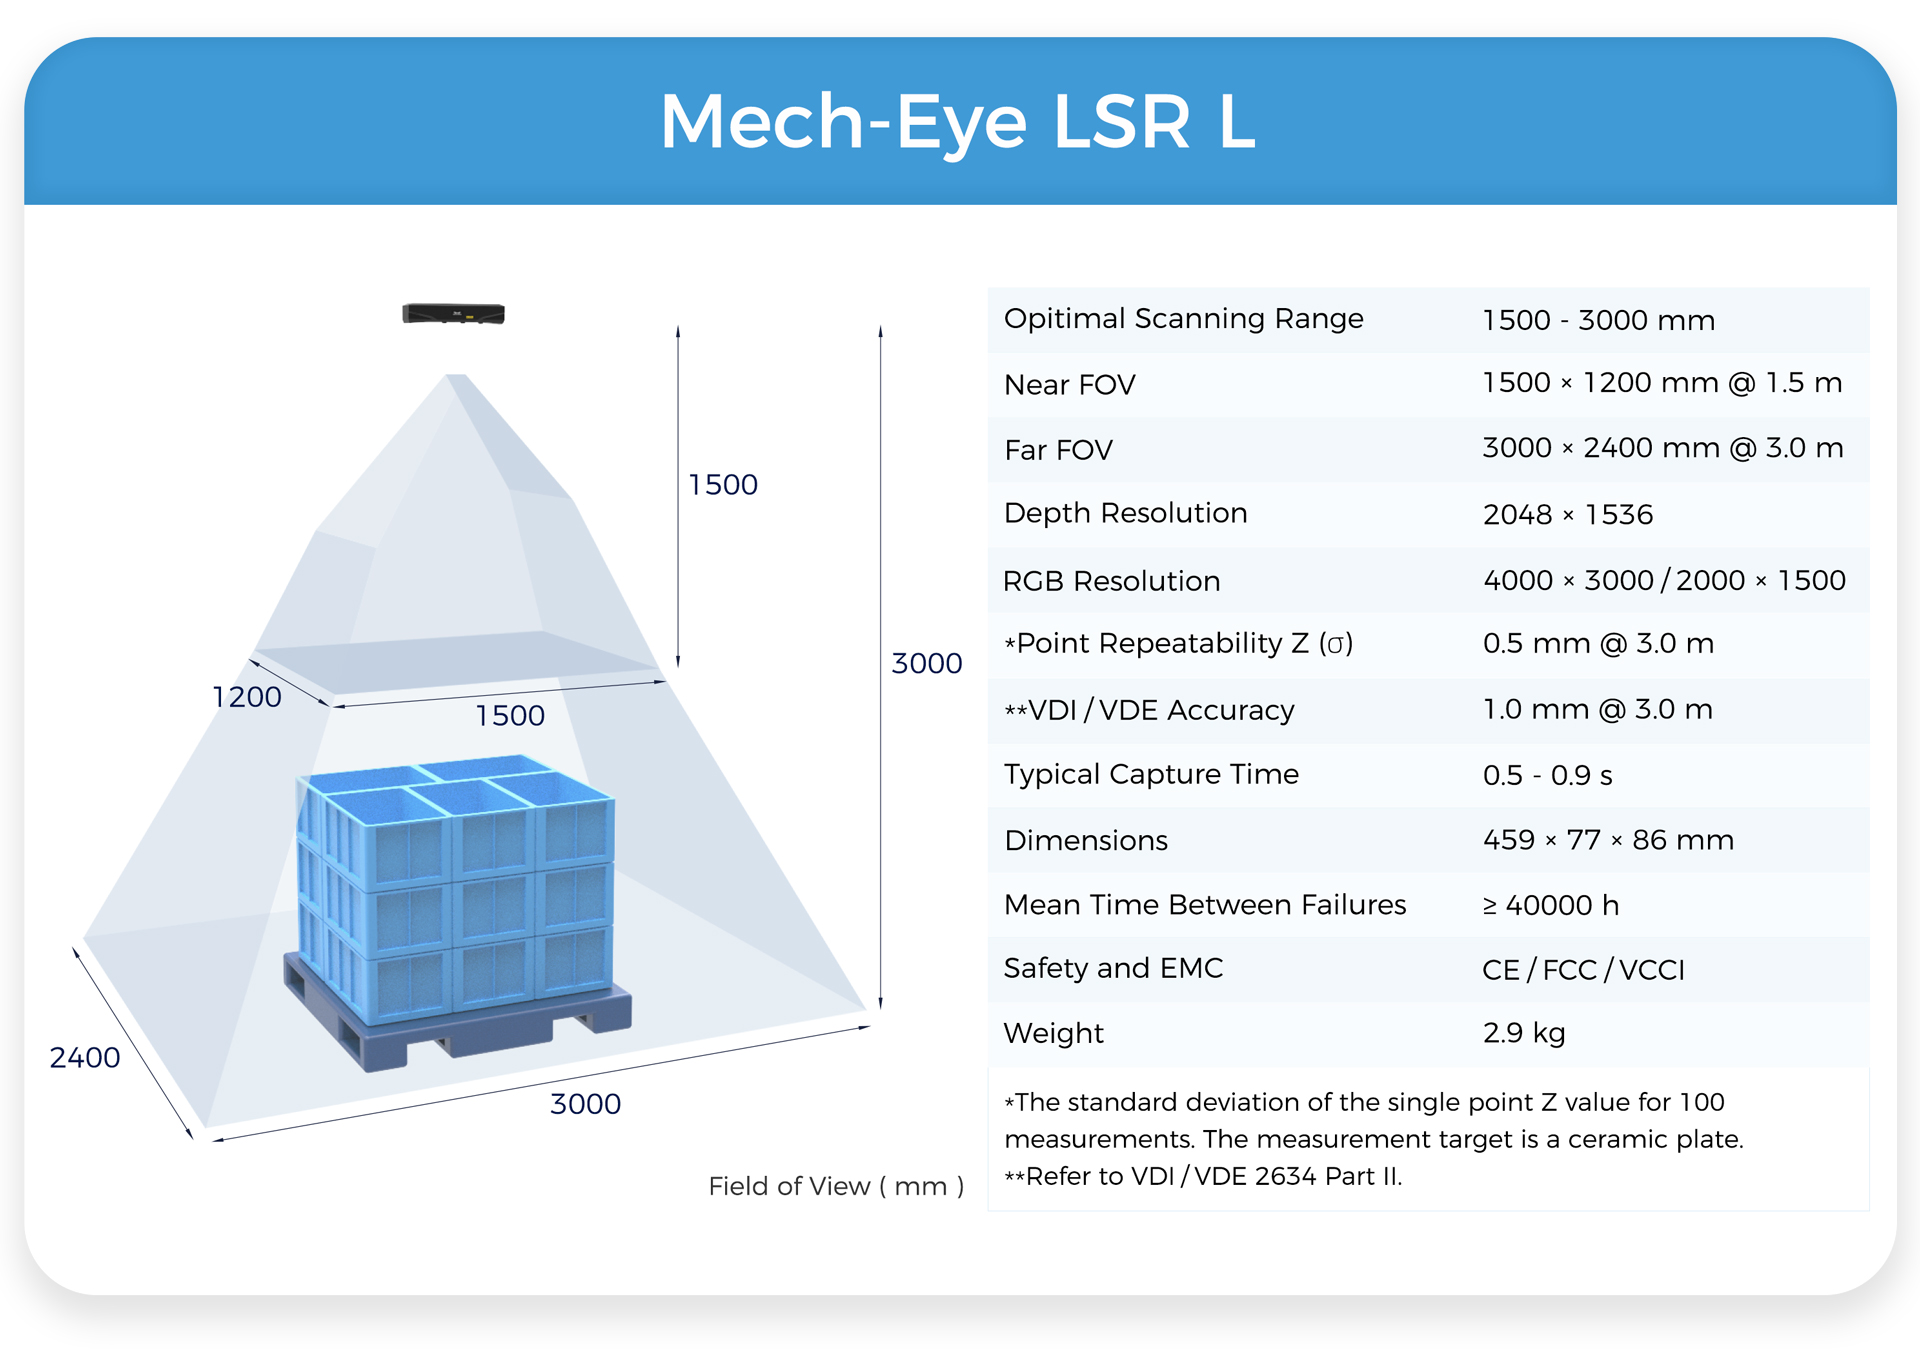 Mech-Mind Launches Brand New 4th Generation Mech-Eye LSR with 100% Improved Ambient Light Resistance and 50% Reduced Size